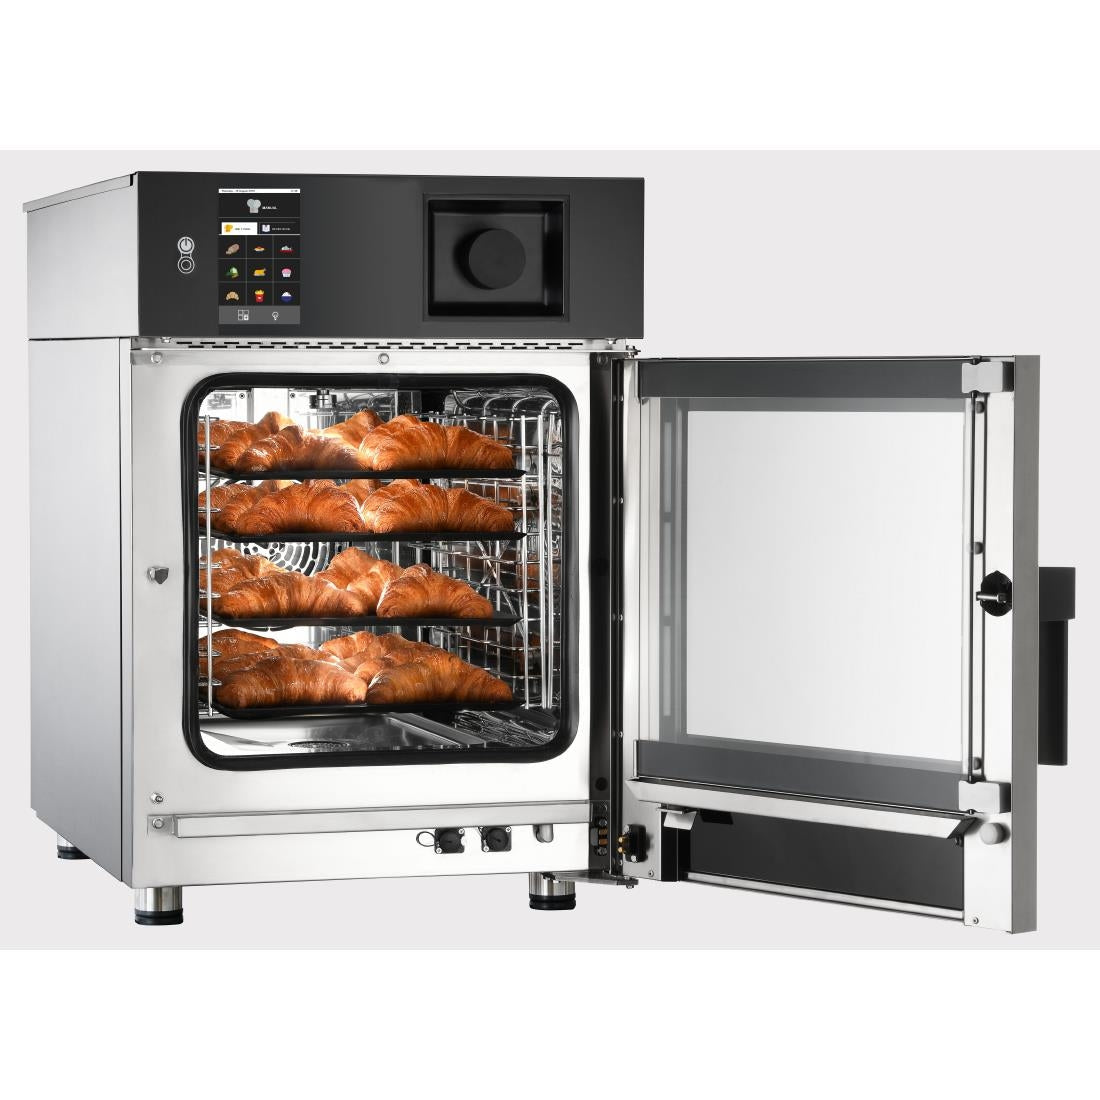 FW871 Giorik Kore KM061W 6 x 1/1GN Slimline Electric Combi Oven with Wash System JD Catering Equipment Solutions Ltd